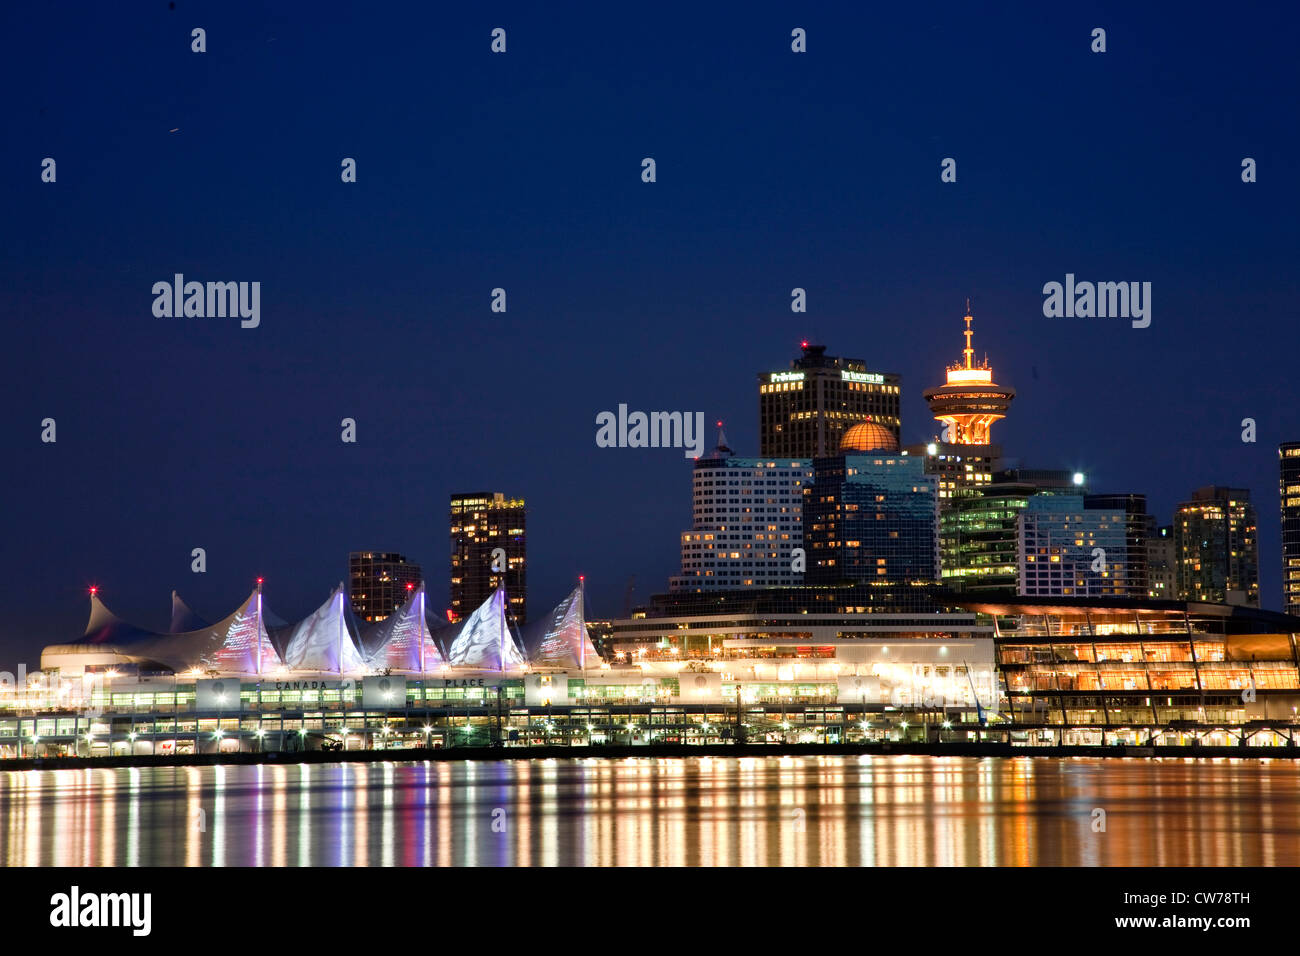 Canada Place in harbour at night, Canada, British Columbia, Vancouver Stock Photo